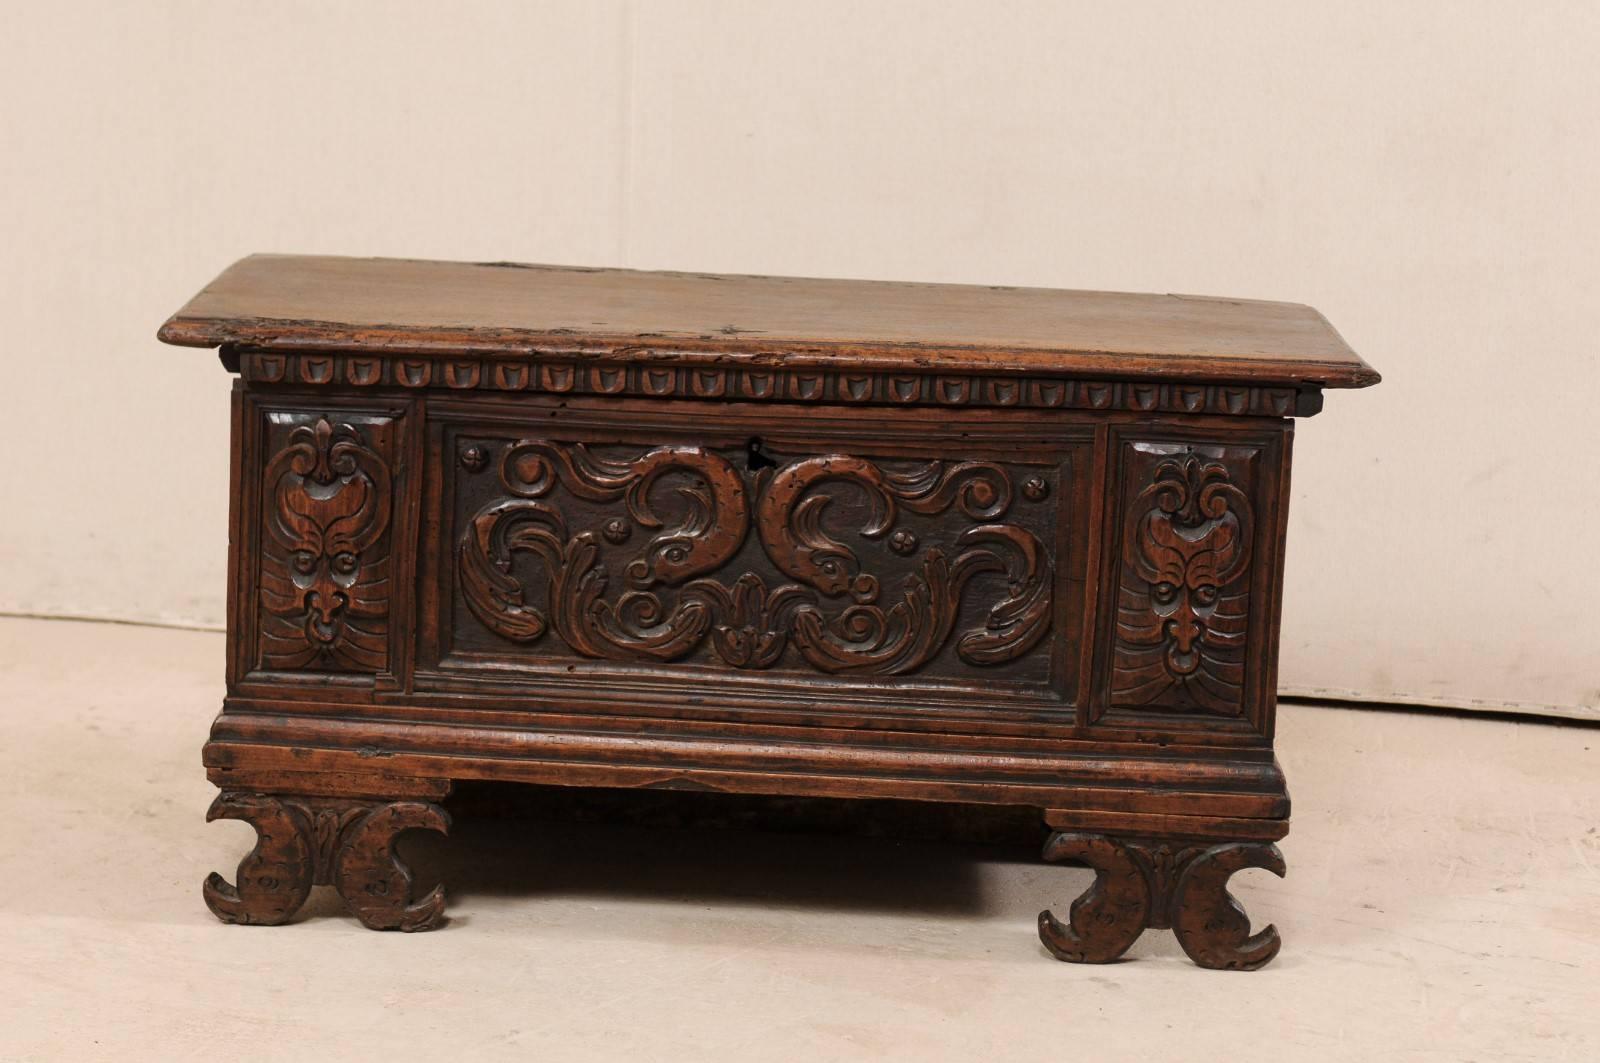 An Italian late 18th century carved wood cassone trunk. This antique cassone from Italy features an ornately hand-carved front center panel with mythical sea creatures flanked by a pair of faces set into front, side panels. This rectangular shaped